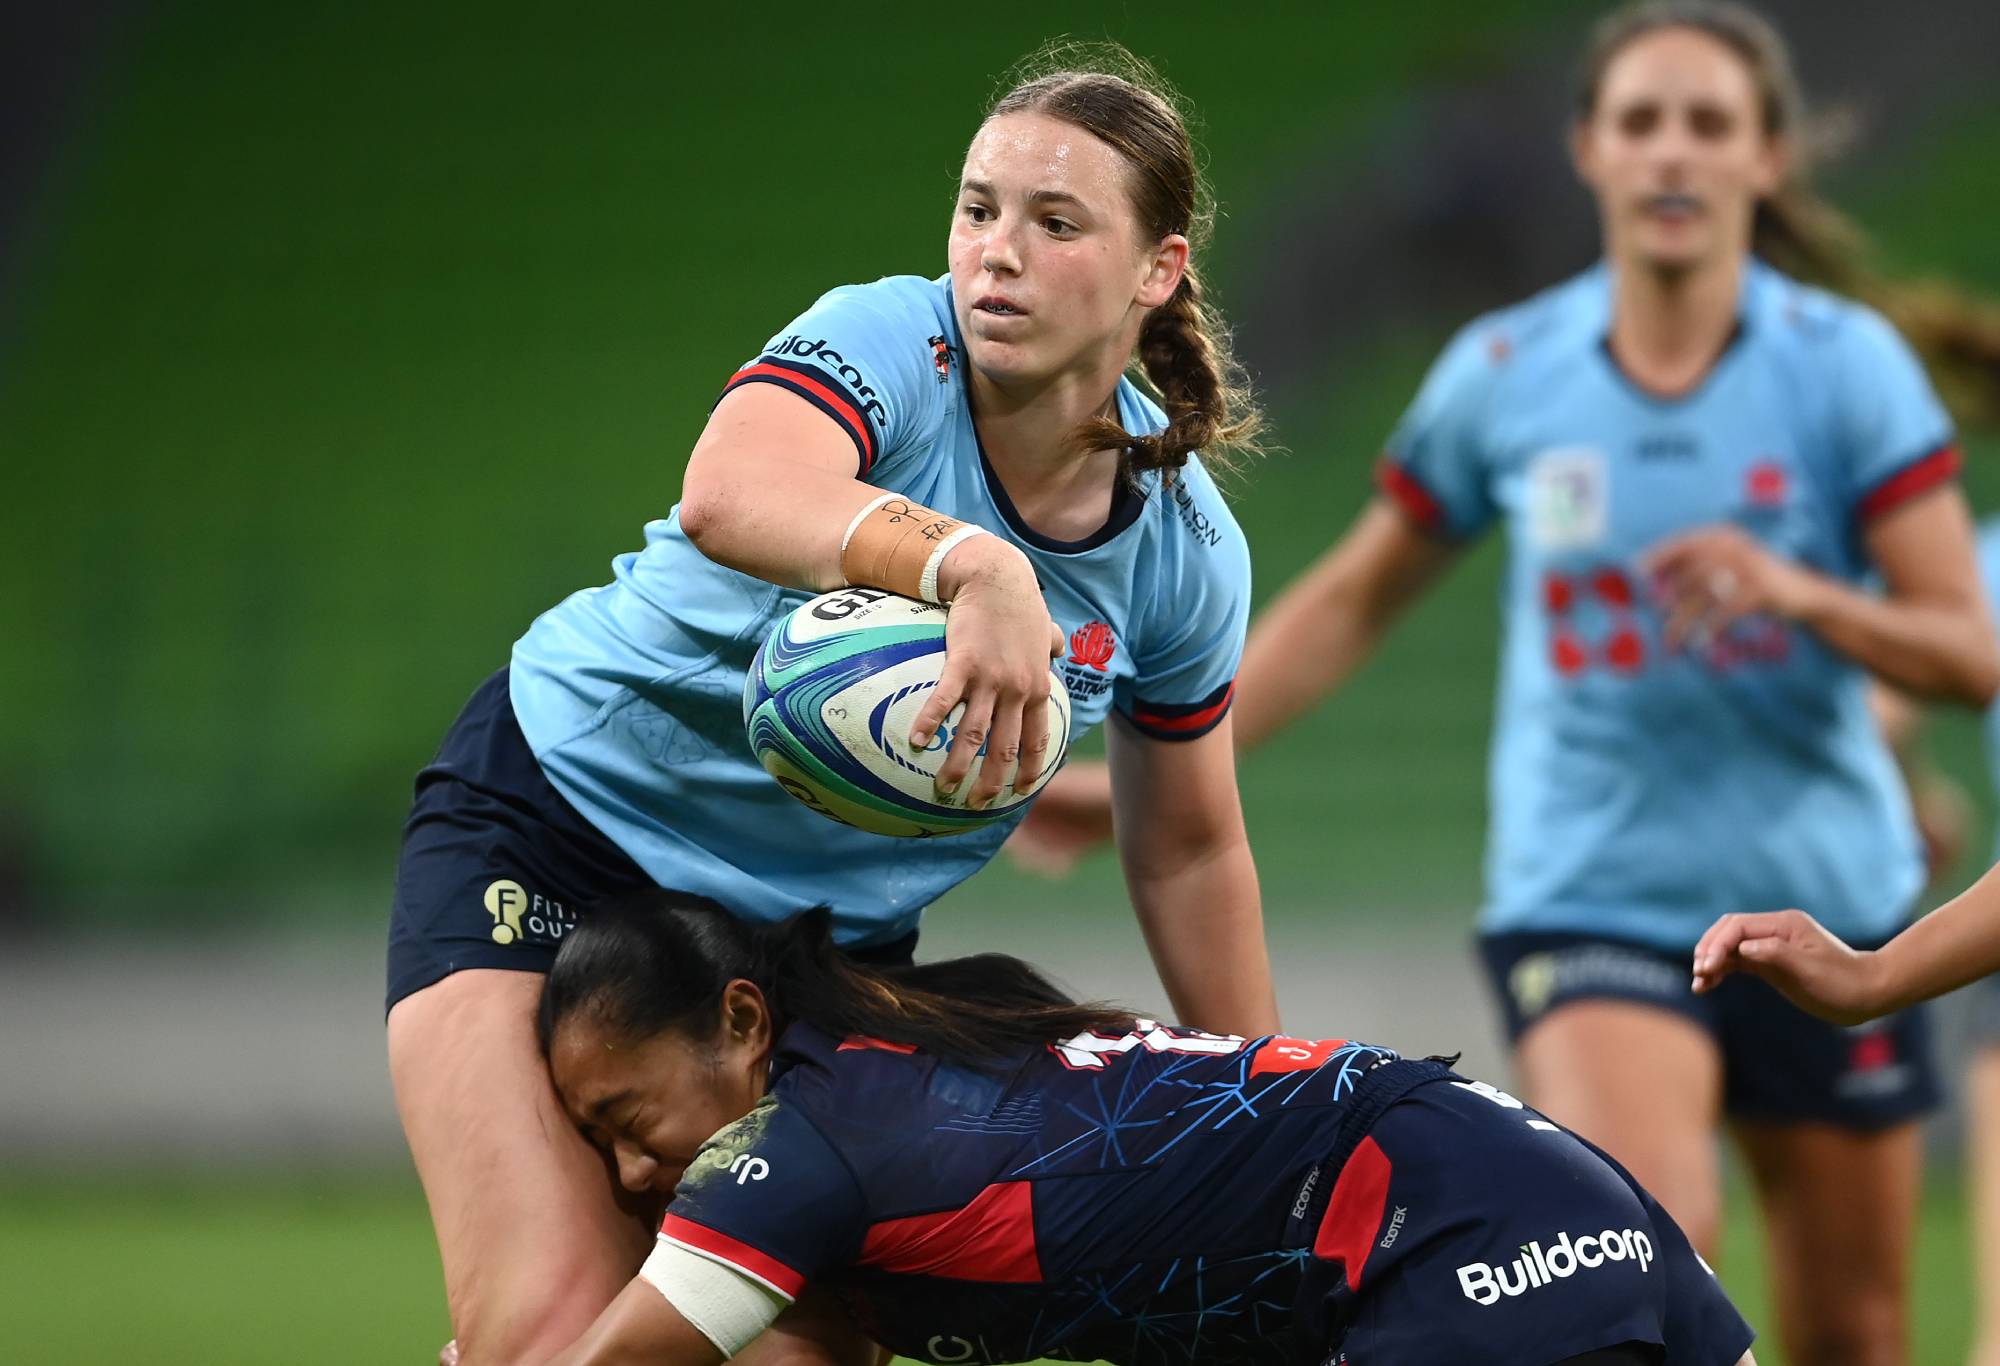 Caitlyn Halse of the Waratahs passes the ball during the Super W match between Melbourne Rebels Women and NSW Waratahs Women at AAMI Park, on April 21, 2023, in Melbourne, Australia. (Photo by Quinn Rooney/Getty Images)